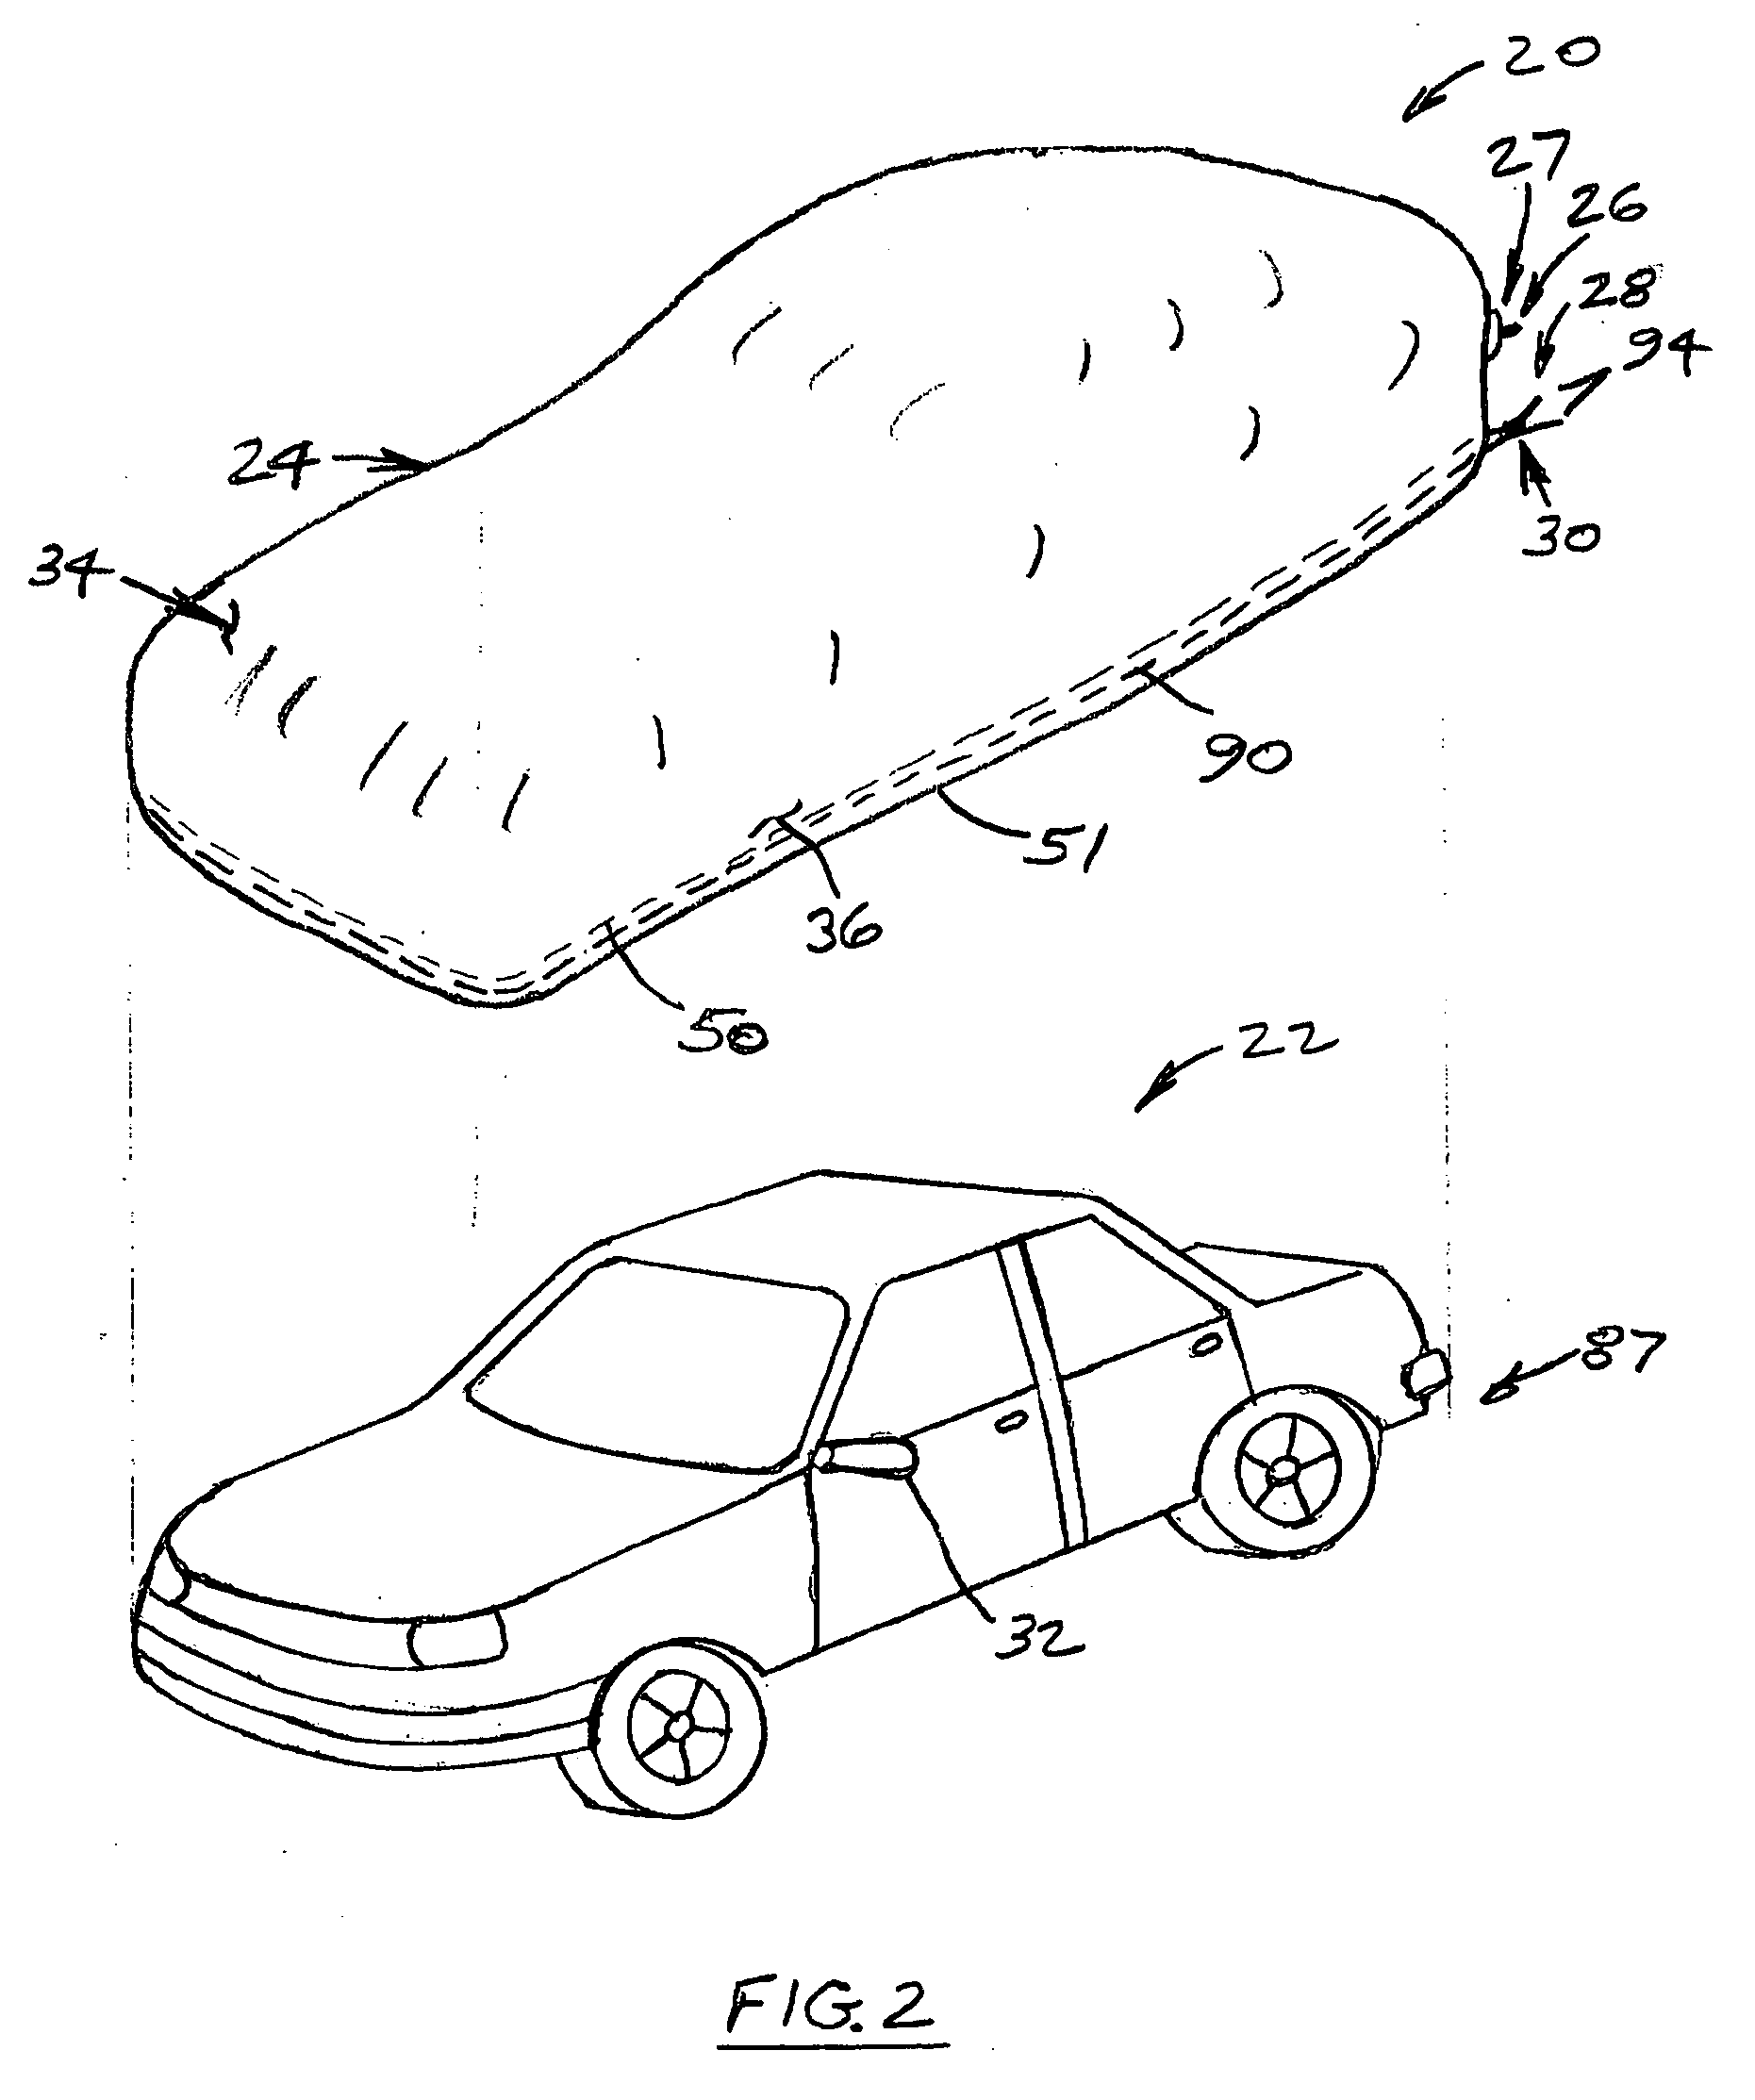 Inflatable protective covers for motor vehicles